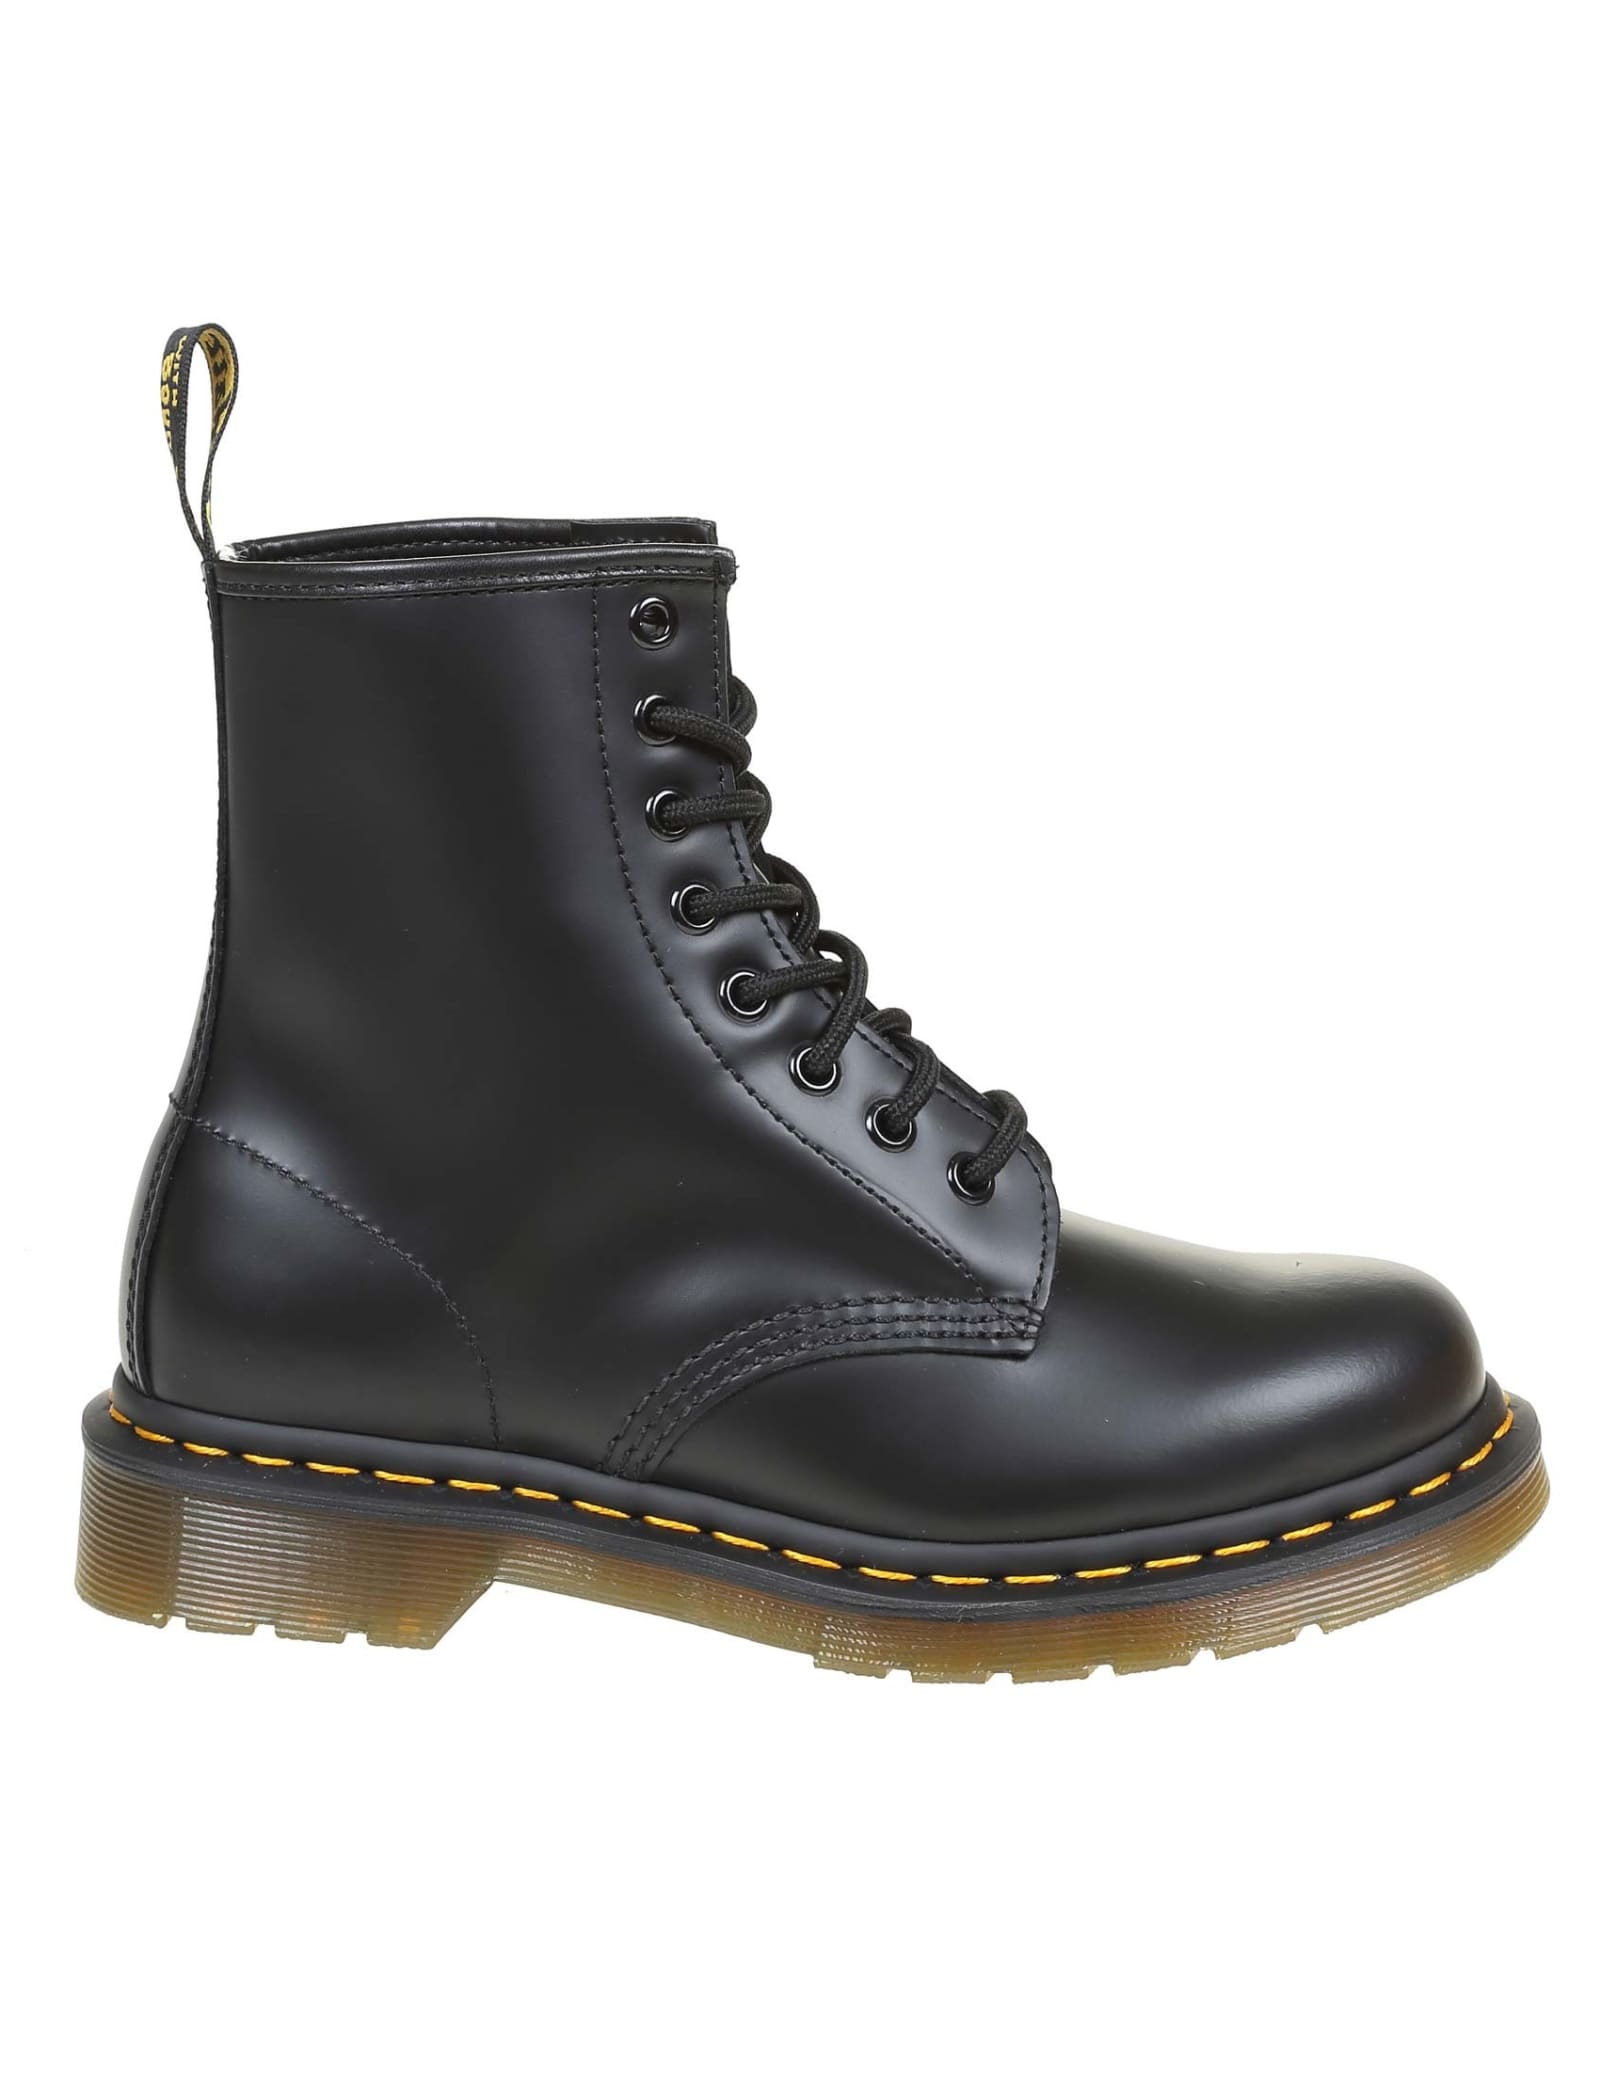 Buy Dr. Martens Dr. martens Smooth Anfibio In Black Leather online, shop Dr. Martens shoes with free shipping